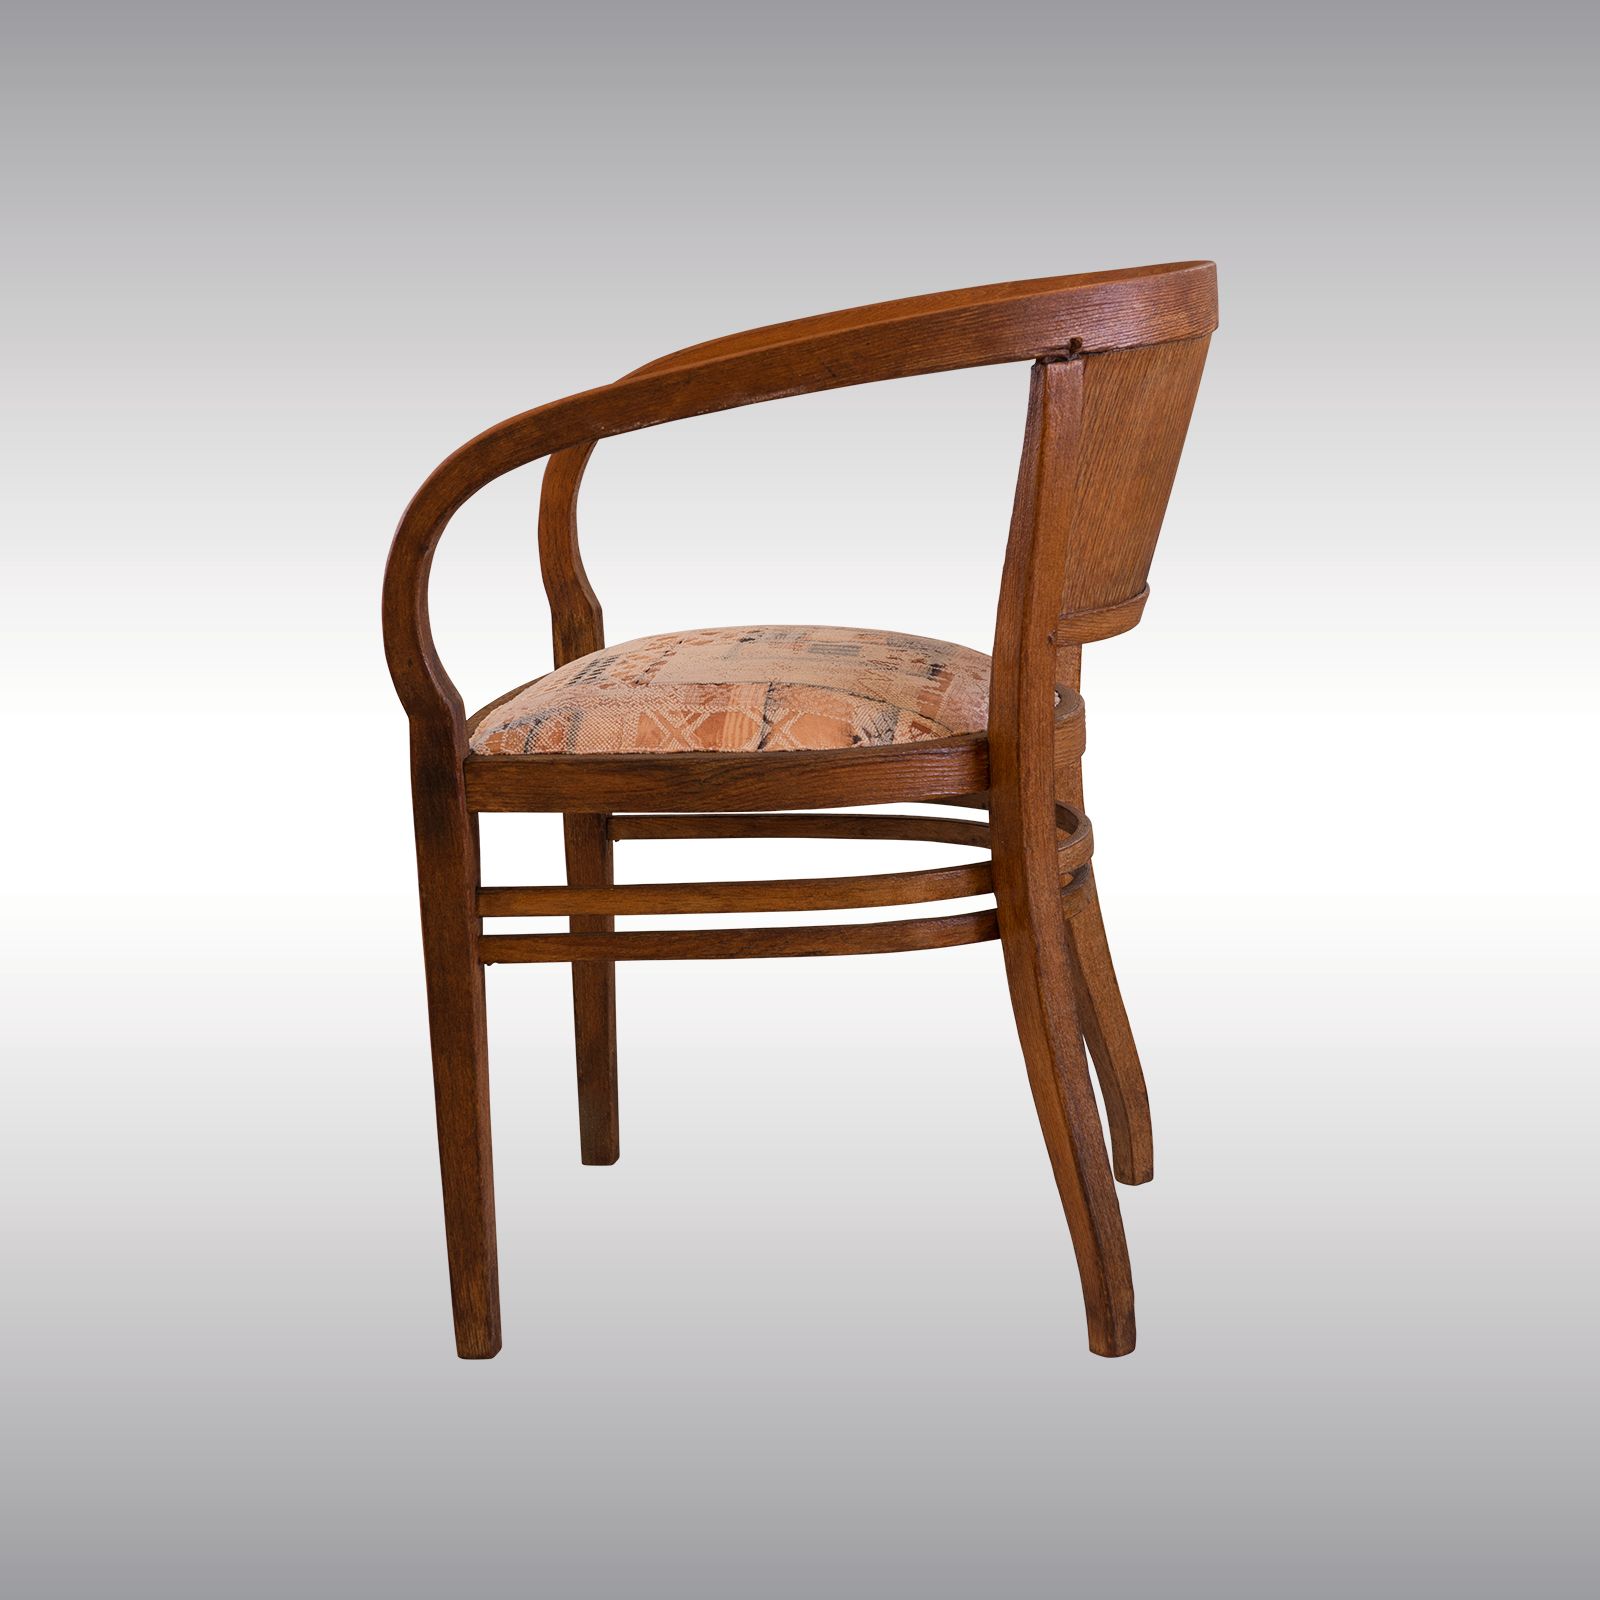 WOKA LAMPS VIENNA - OrderNr.:  80074|Extremely rare and beautiful Otto Wagner Chair by Thonet 1901